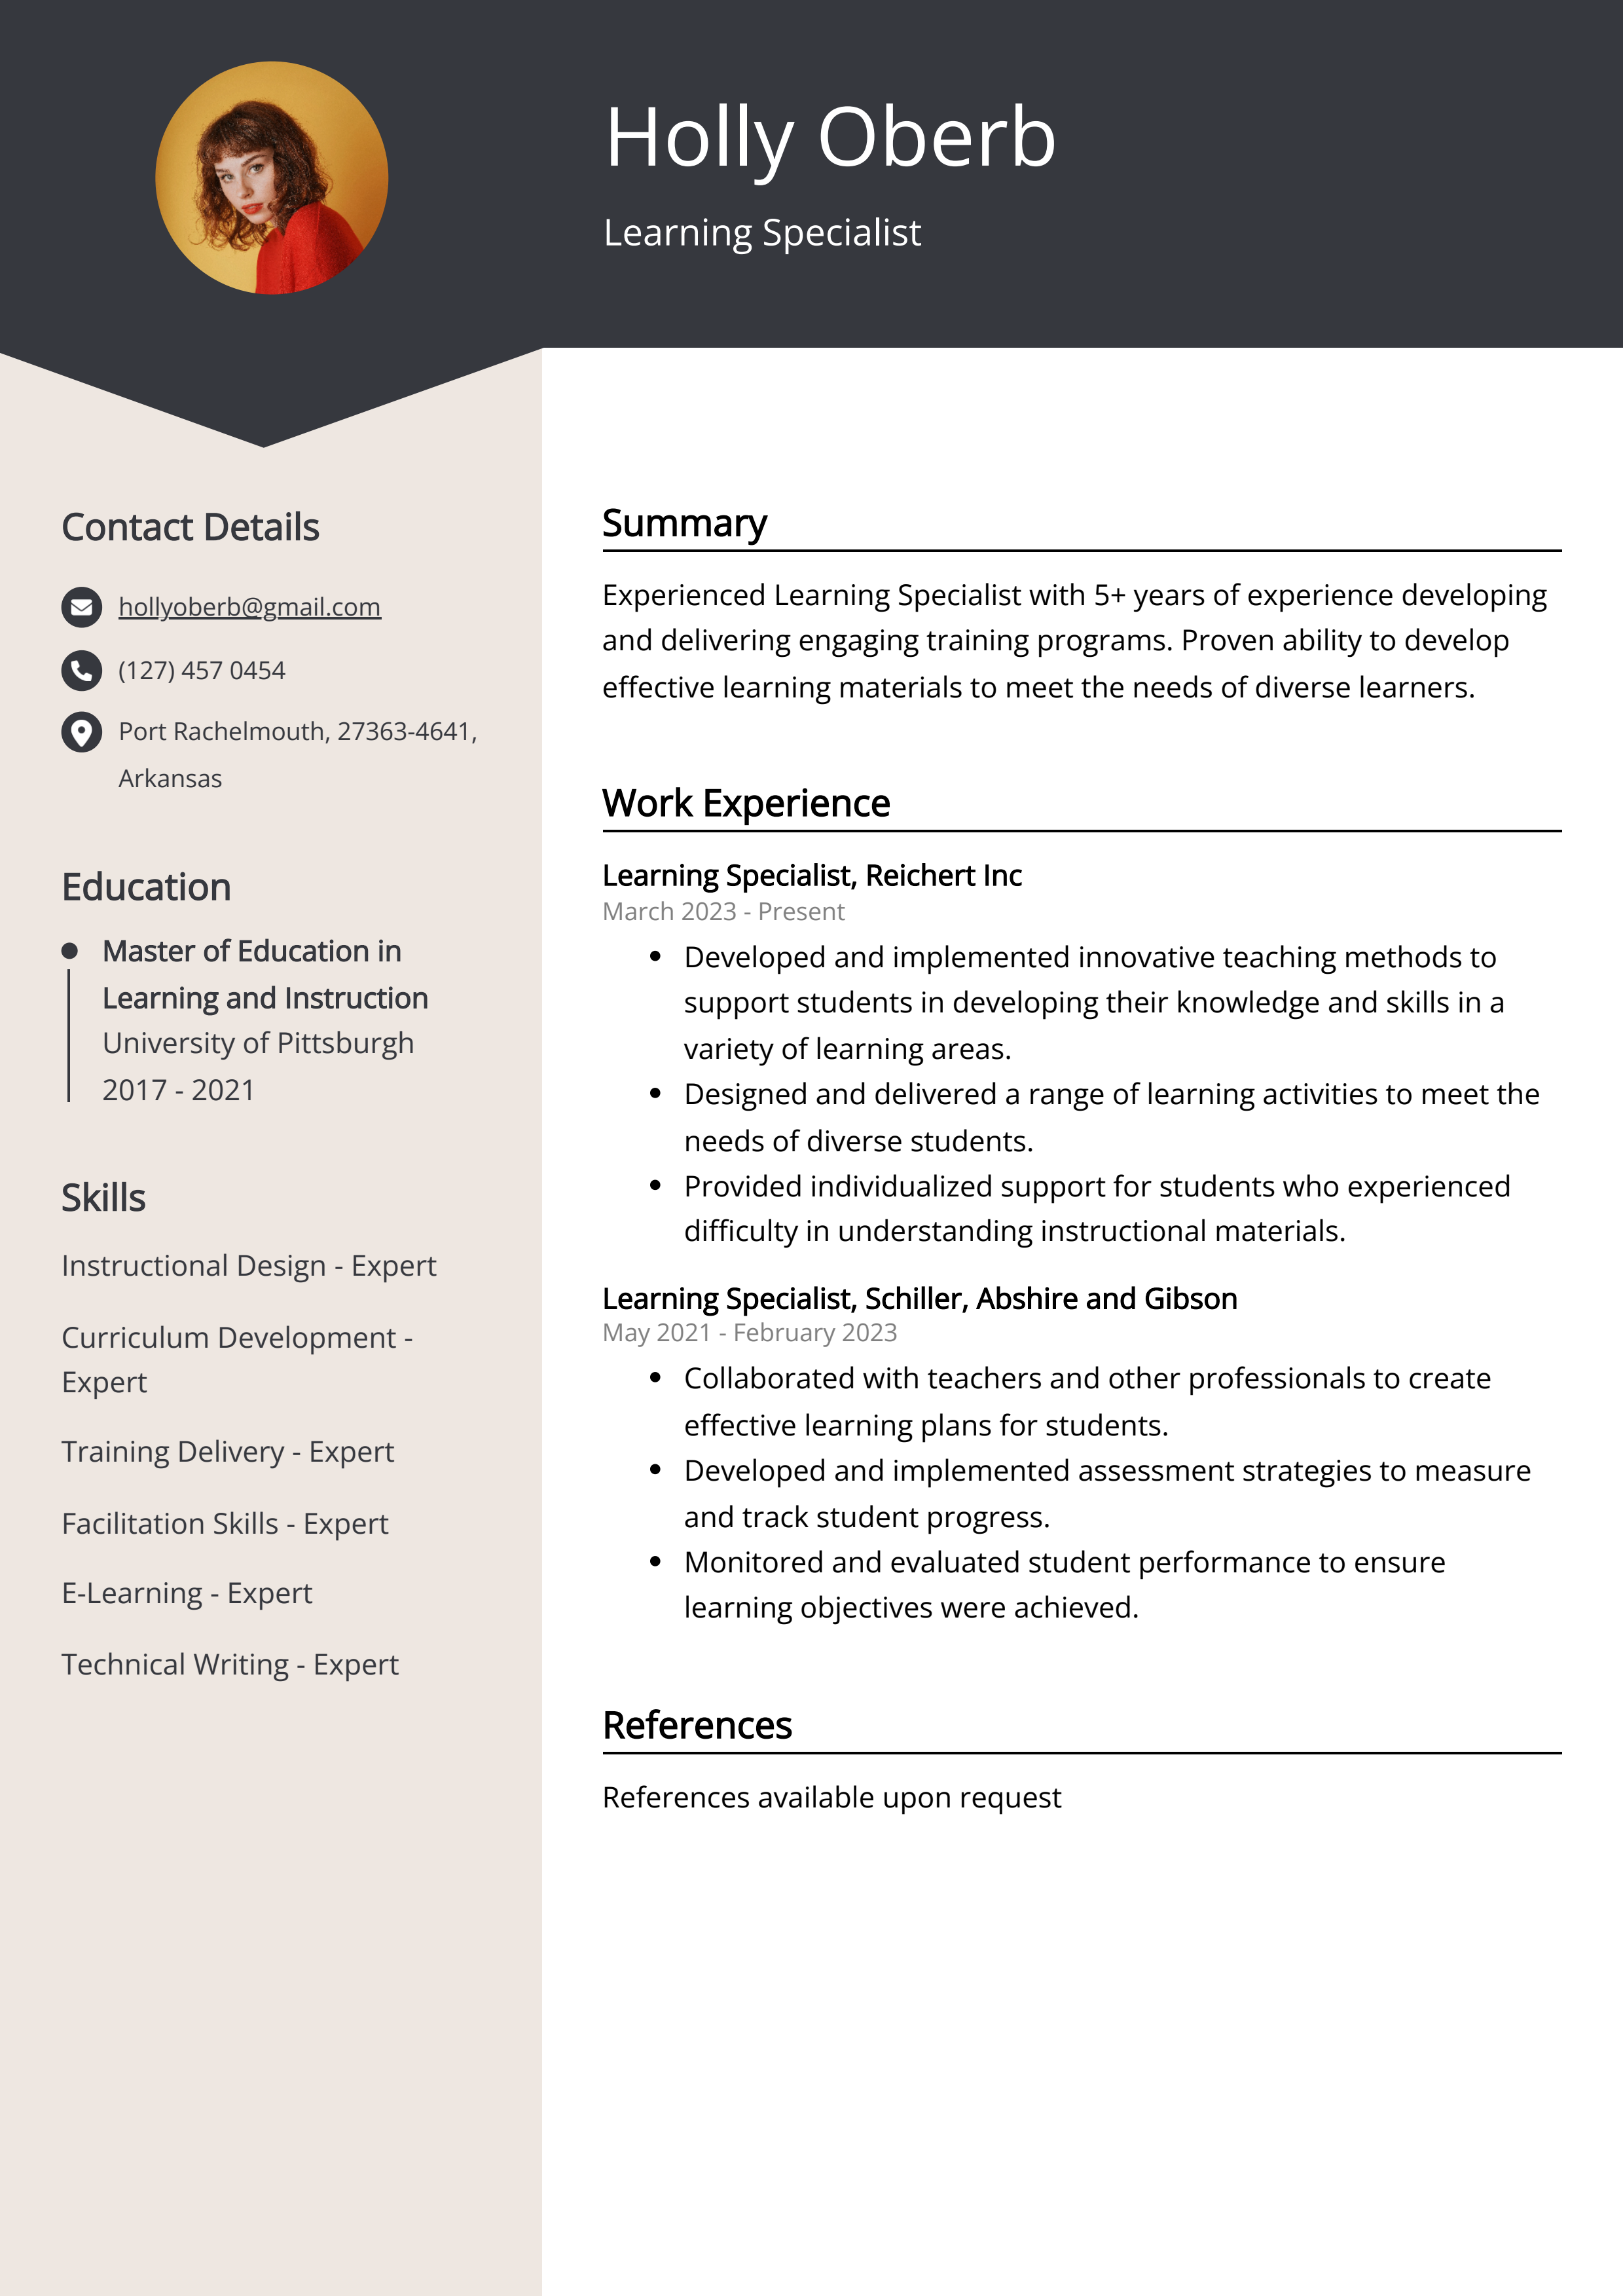 Learning Specialist CV Example